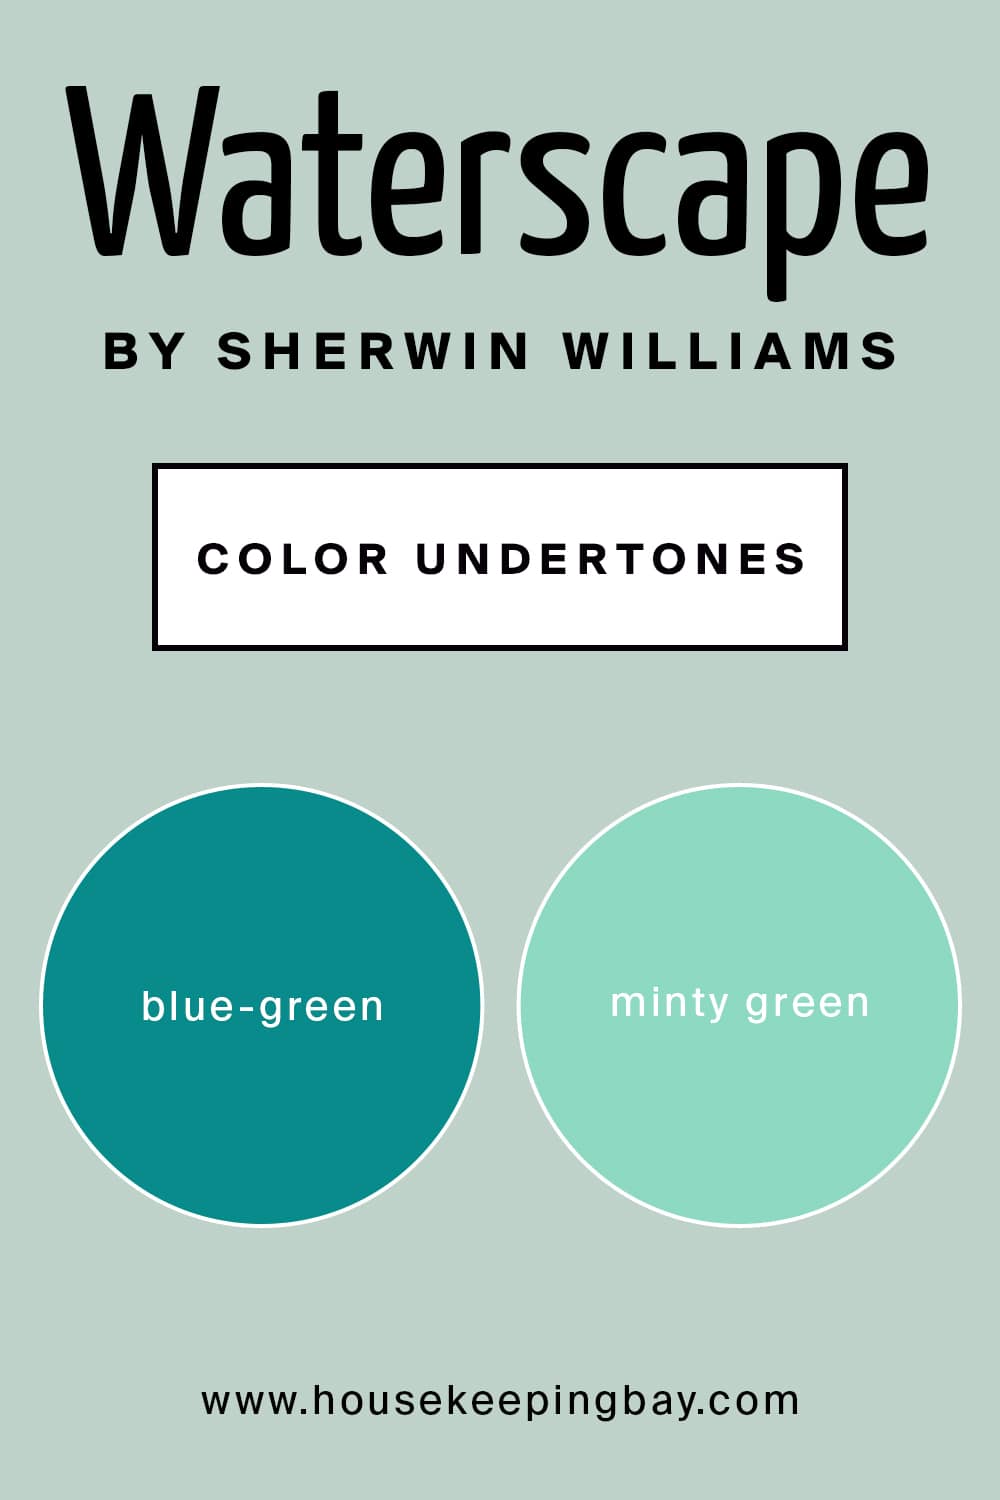 Waterscape by Sherwin Williams Color Undertones